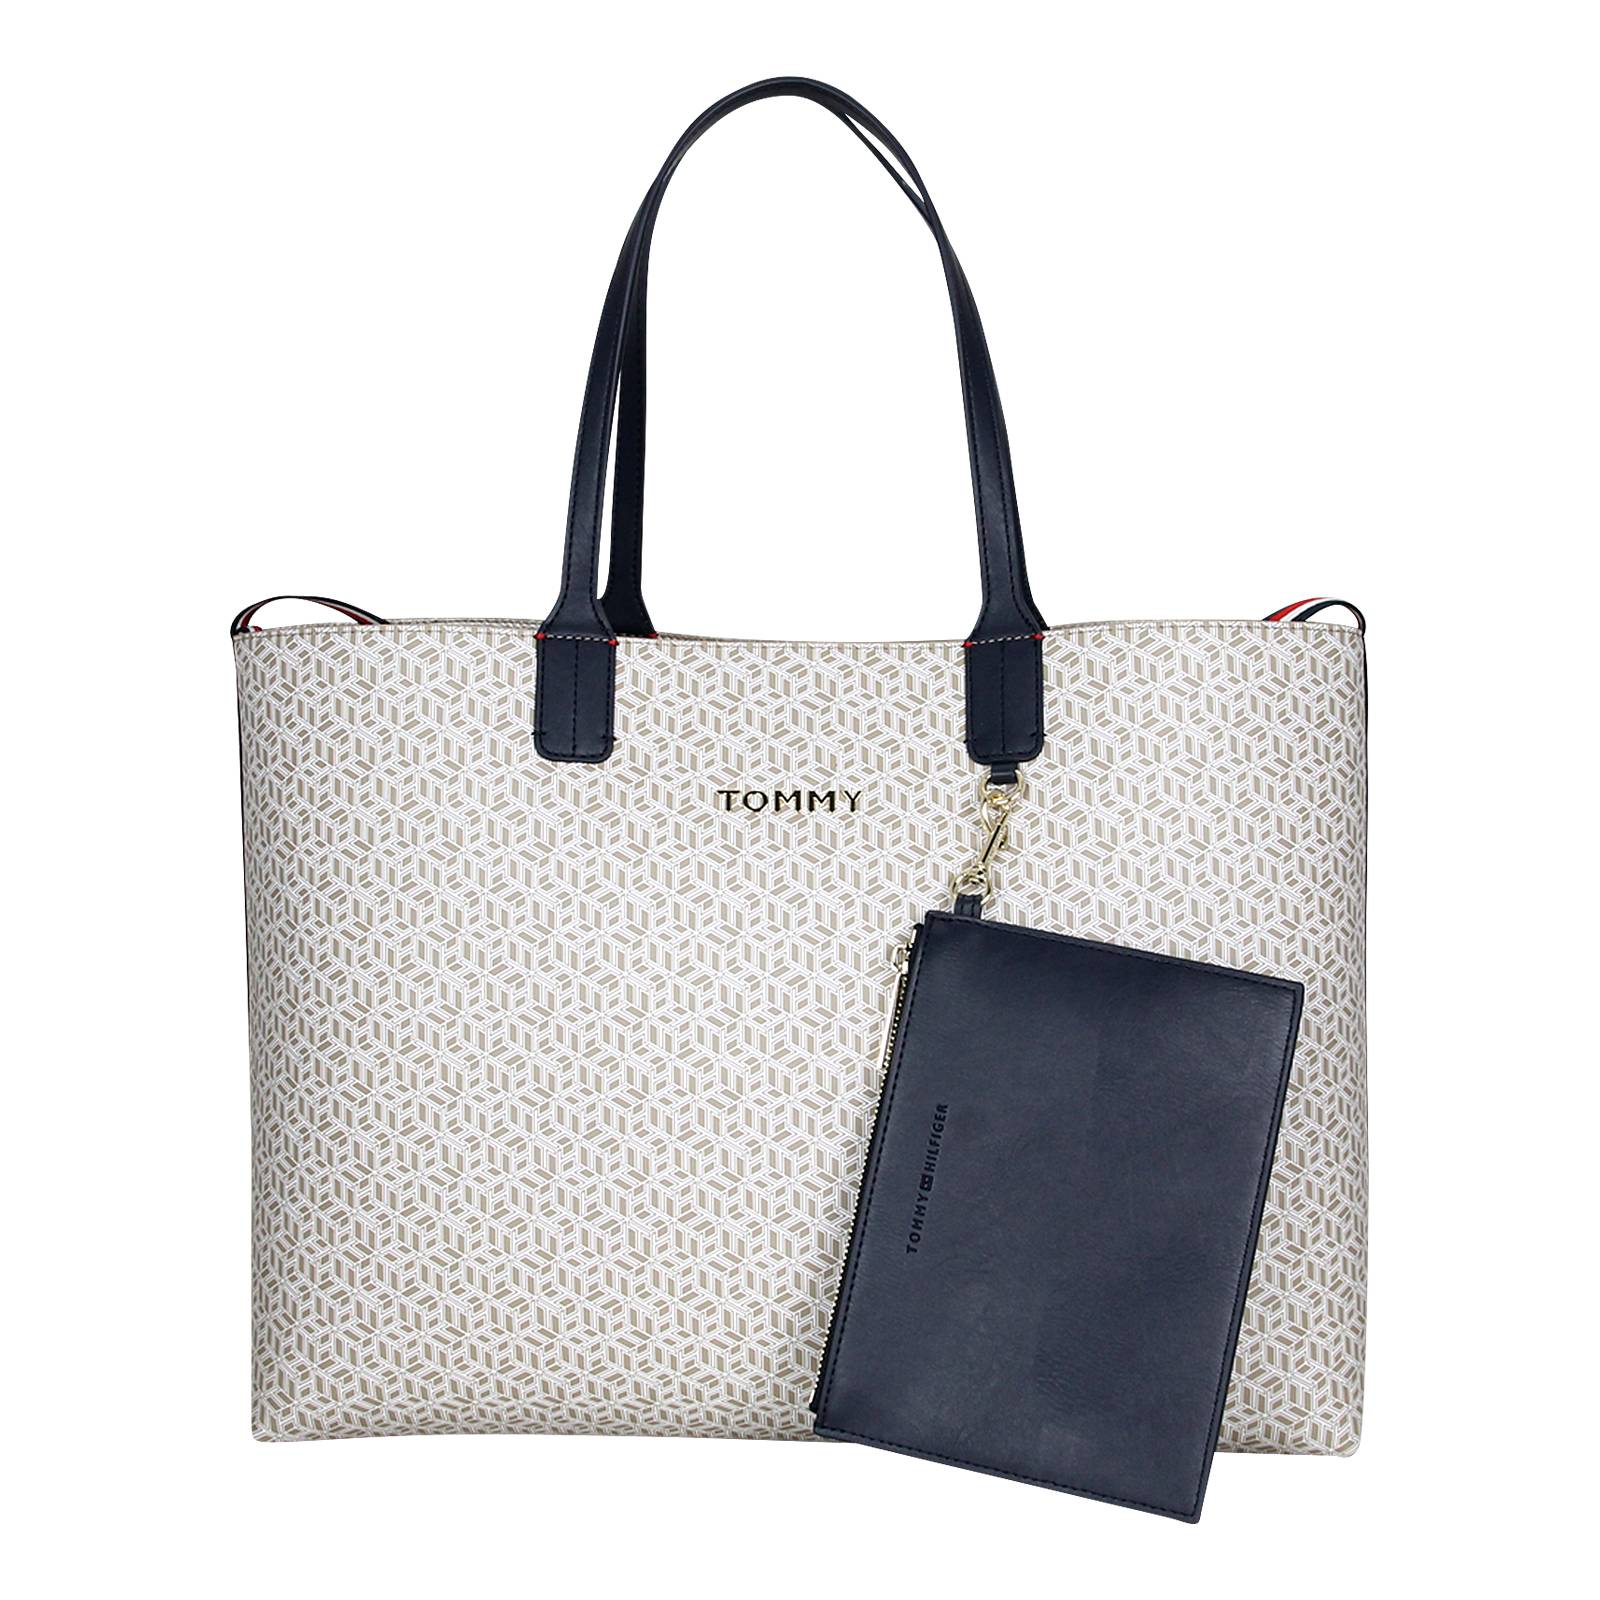 Iconic Tommy Tote Monogram - Tommy Hilfiger Women's Handbag made of  synthetic leather - Gianna Kazakou Online